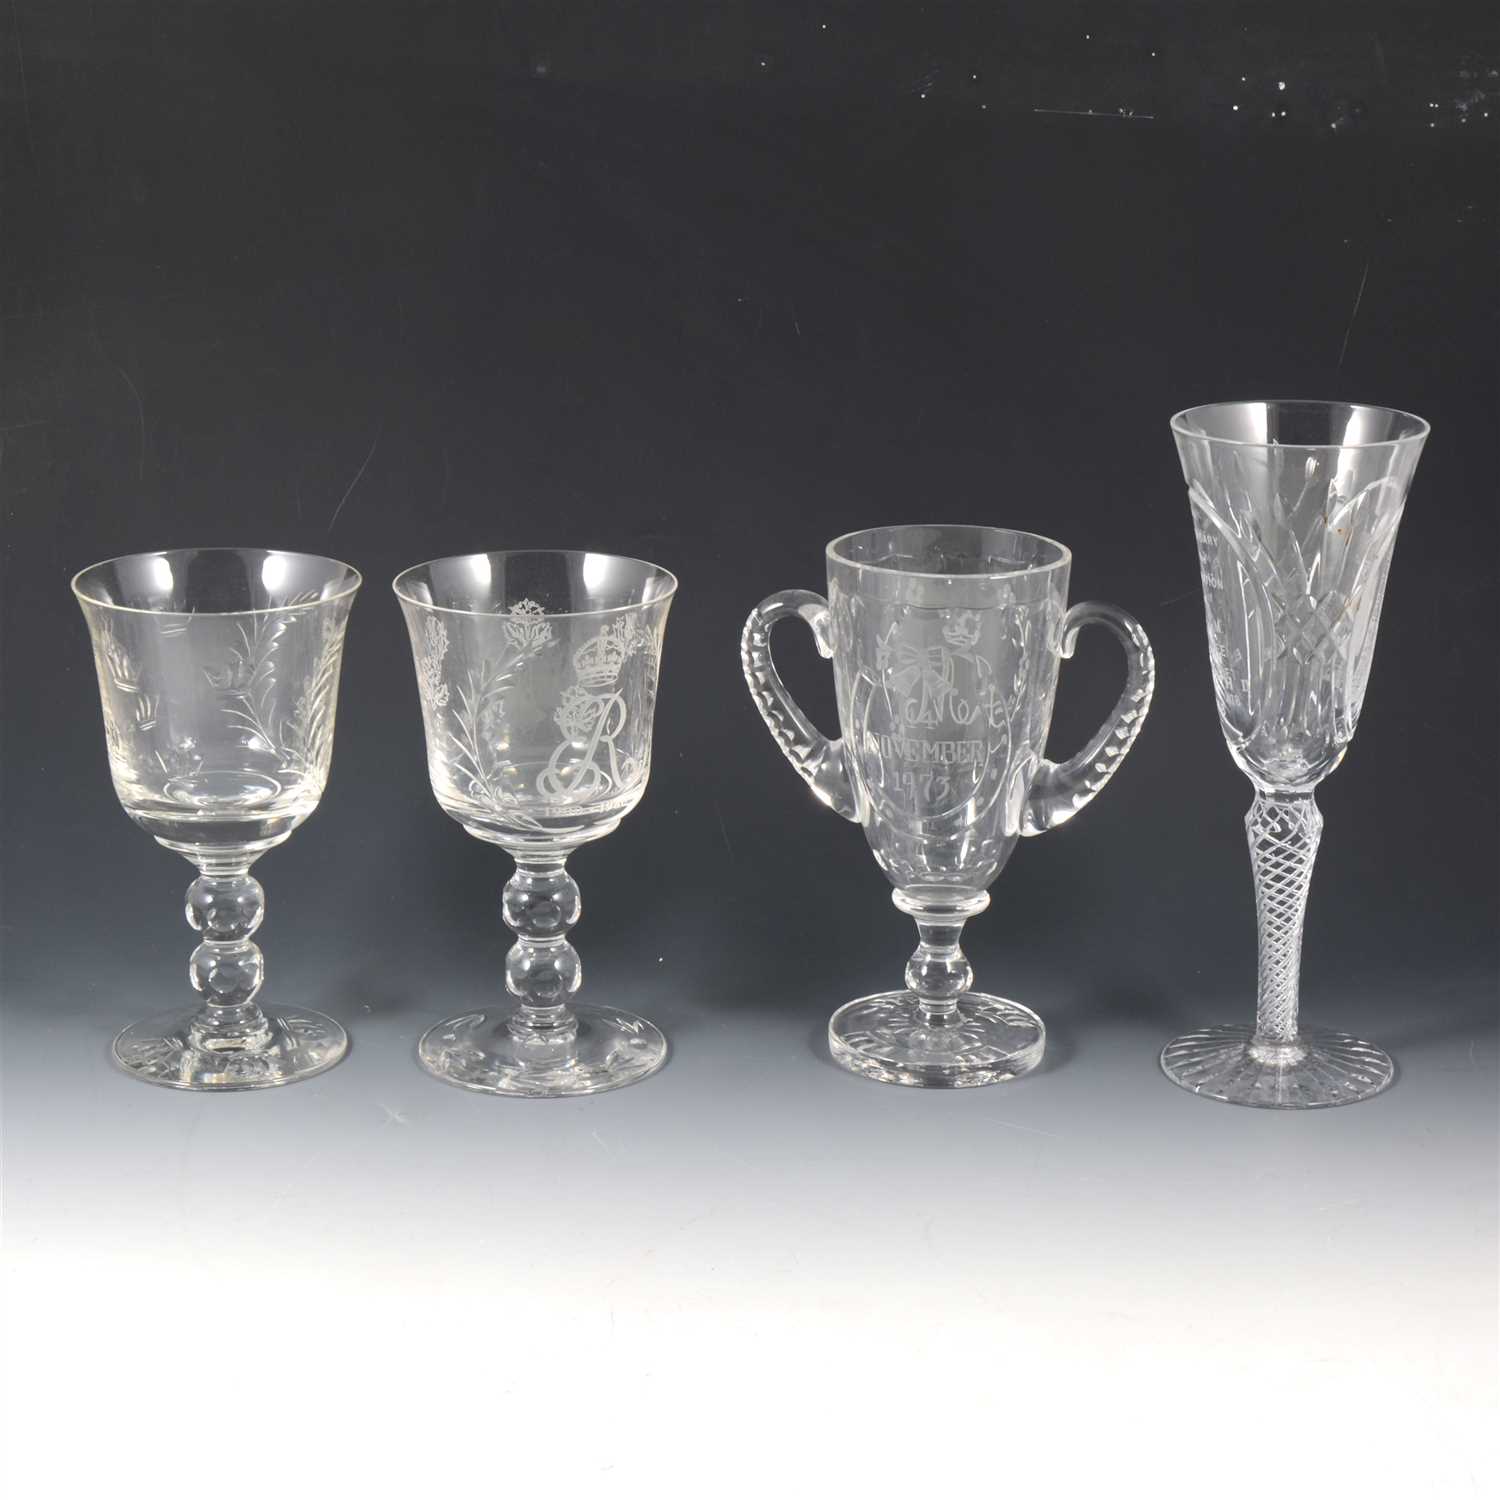 Lot 61 - Stuart Crystal Silver Jubilee commemorative goblet, 1977, and other commemorative glass.